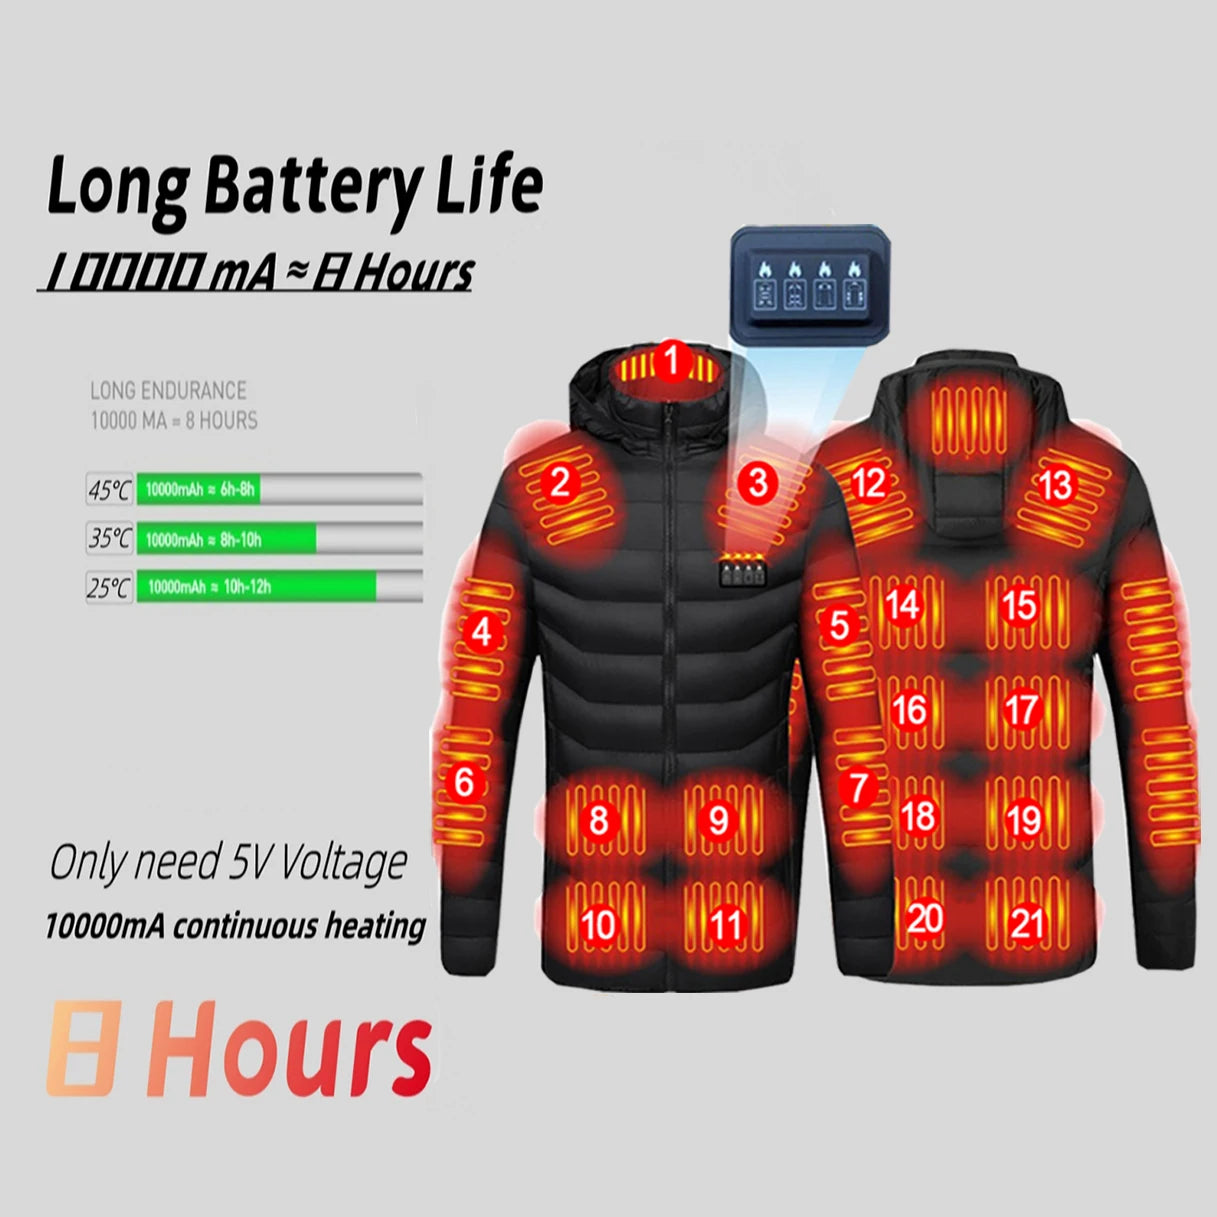 Women  21 Areas Heated Jacket USB Electric Heating Vest For Women Winter Outdoor Warm Thermal Coat Parka Jacket Unisex